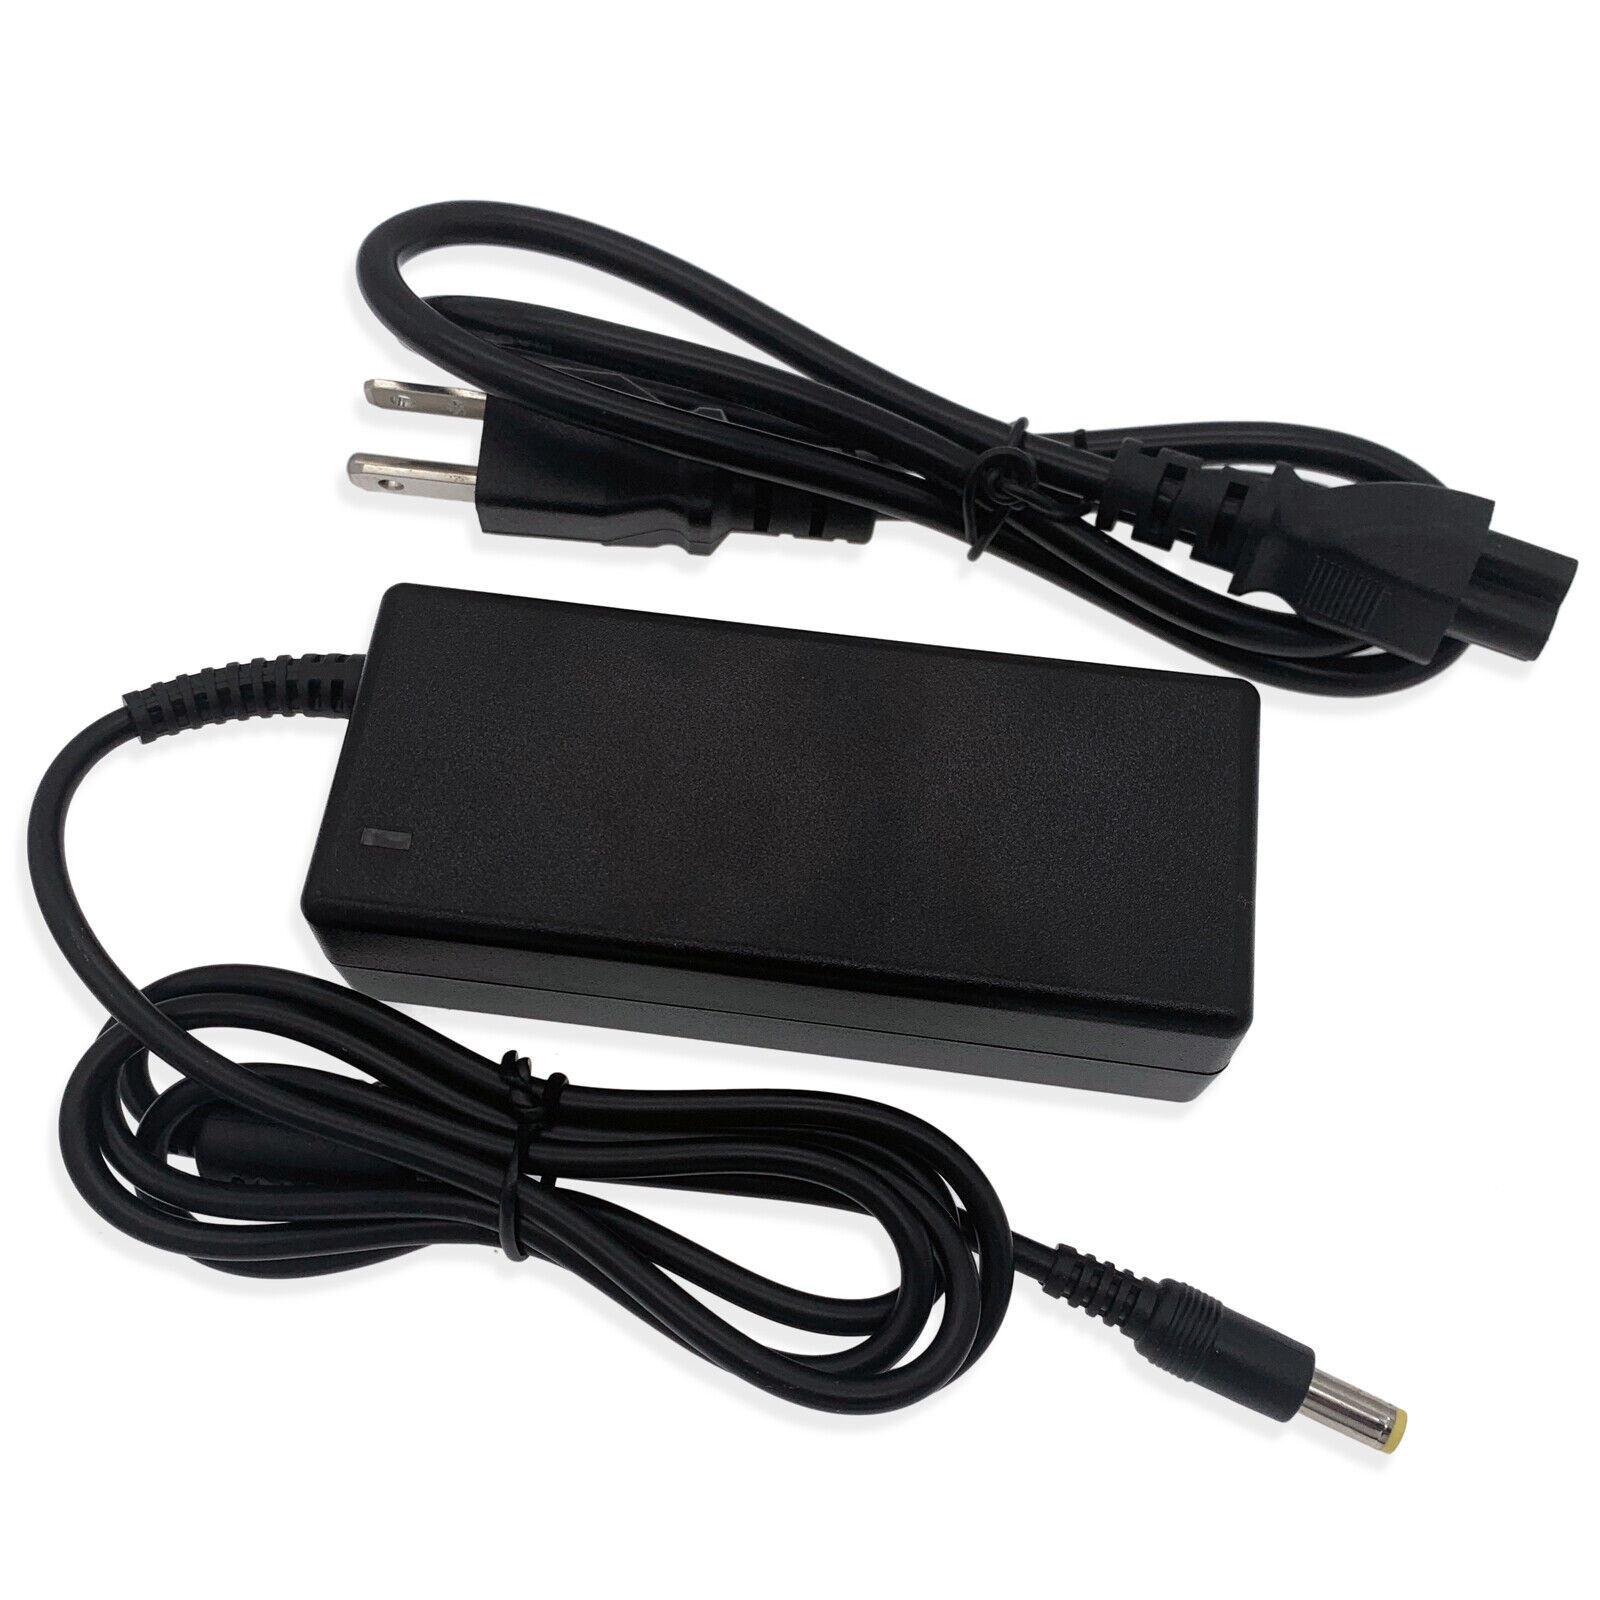 65w AC Adapter Charger Power for Acer Aspire E1-532-4629 E1-532-4646 E1-532-4870 - image 5 of 6